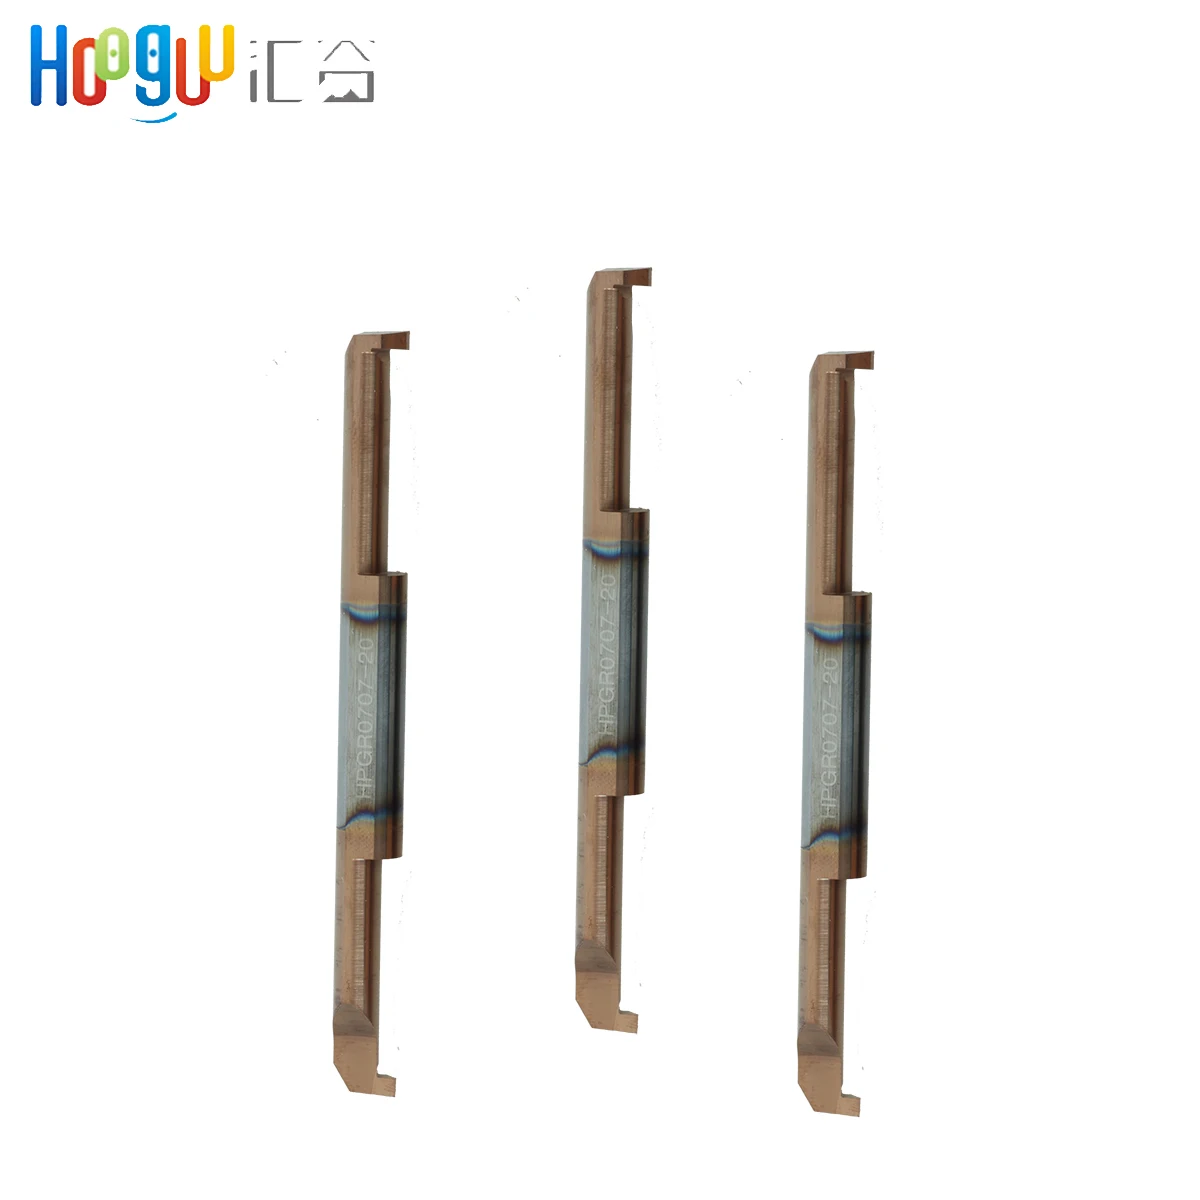 

Boring tool for Double headed cutting HPGR0707 20 Small Hole slot knife Lathe Cutter tool metal lathe Coated Boring Tools, Picture shown